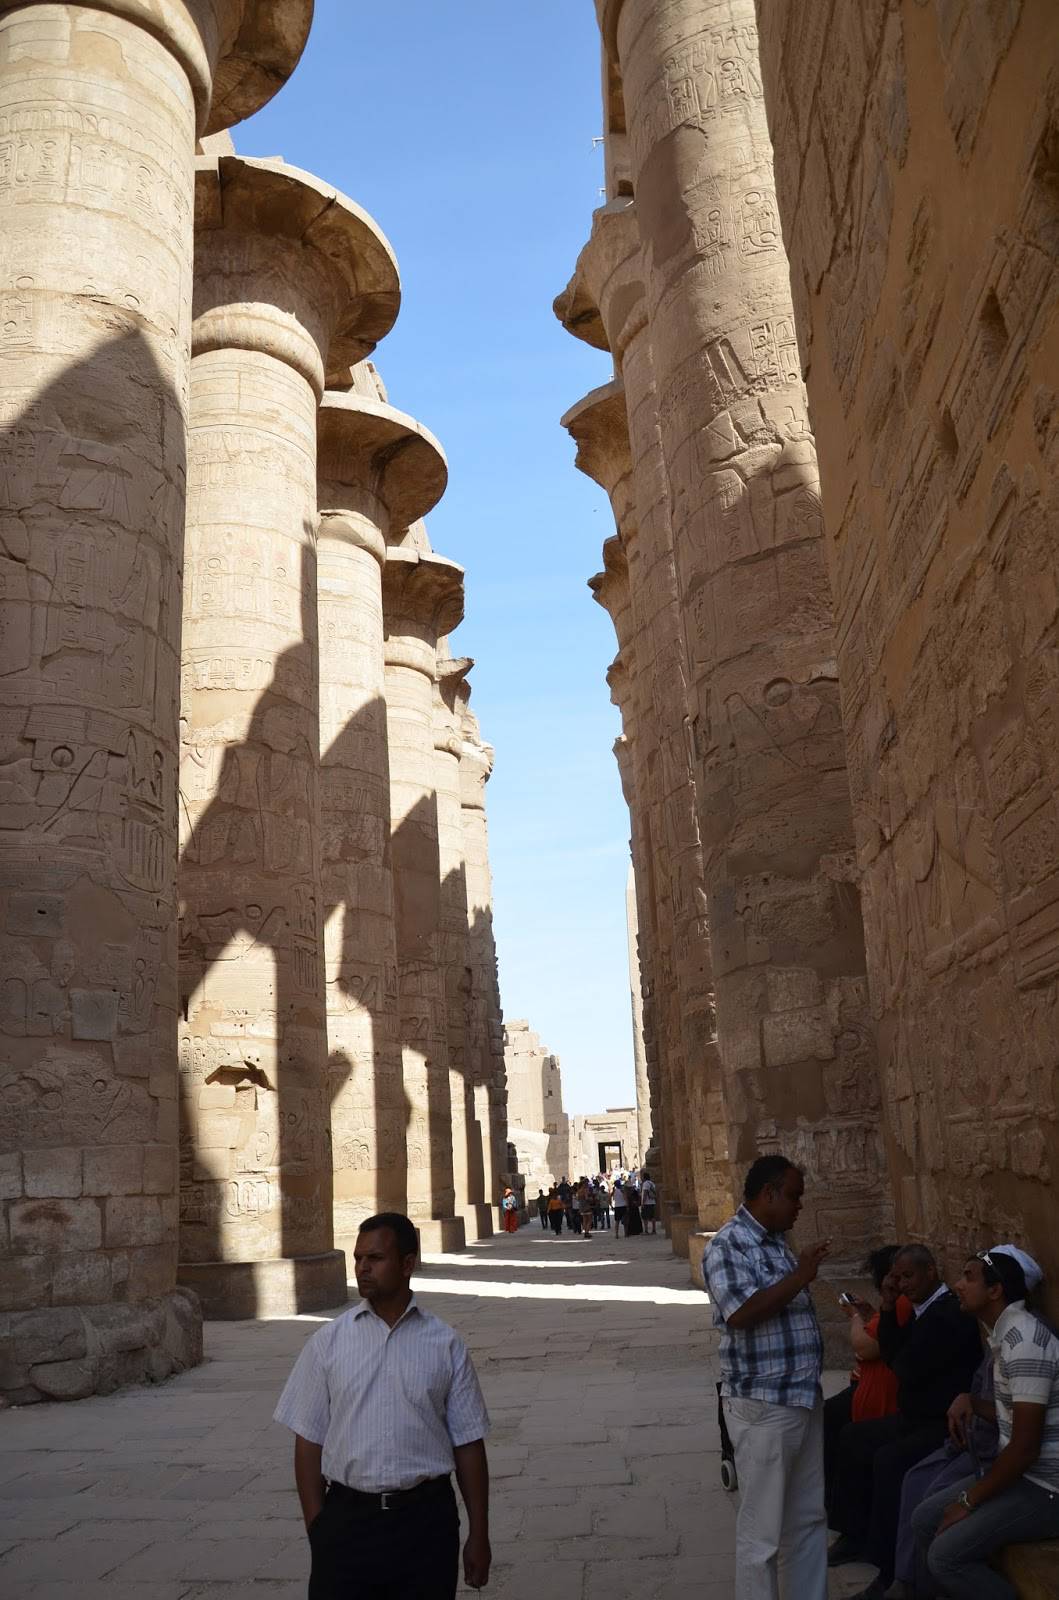 Hypostyle Hall at Karnak Temple in Luxor, Egypt